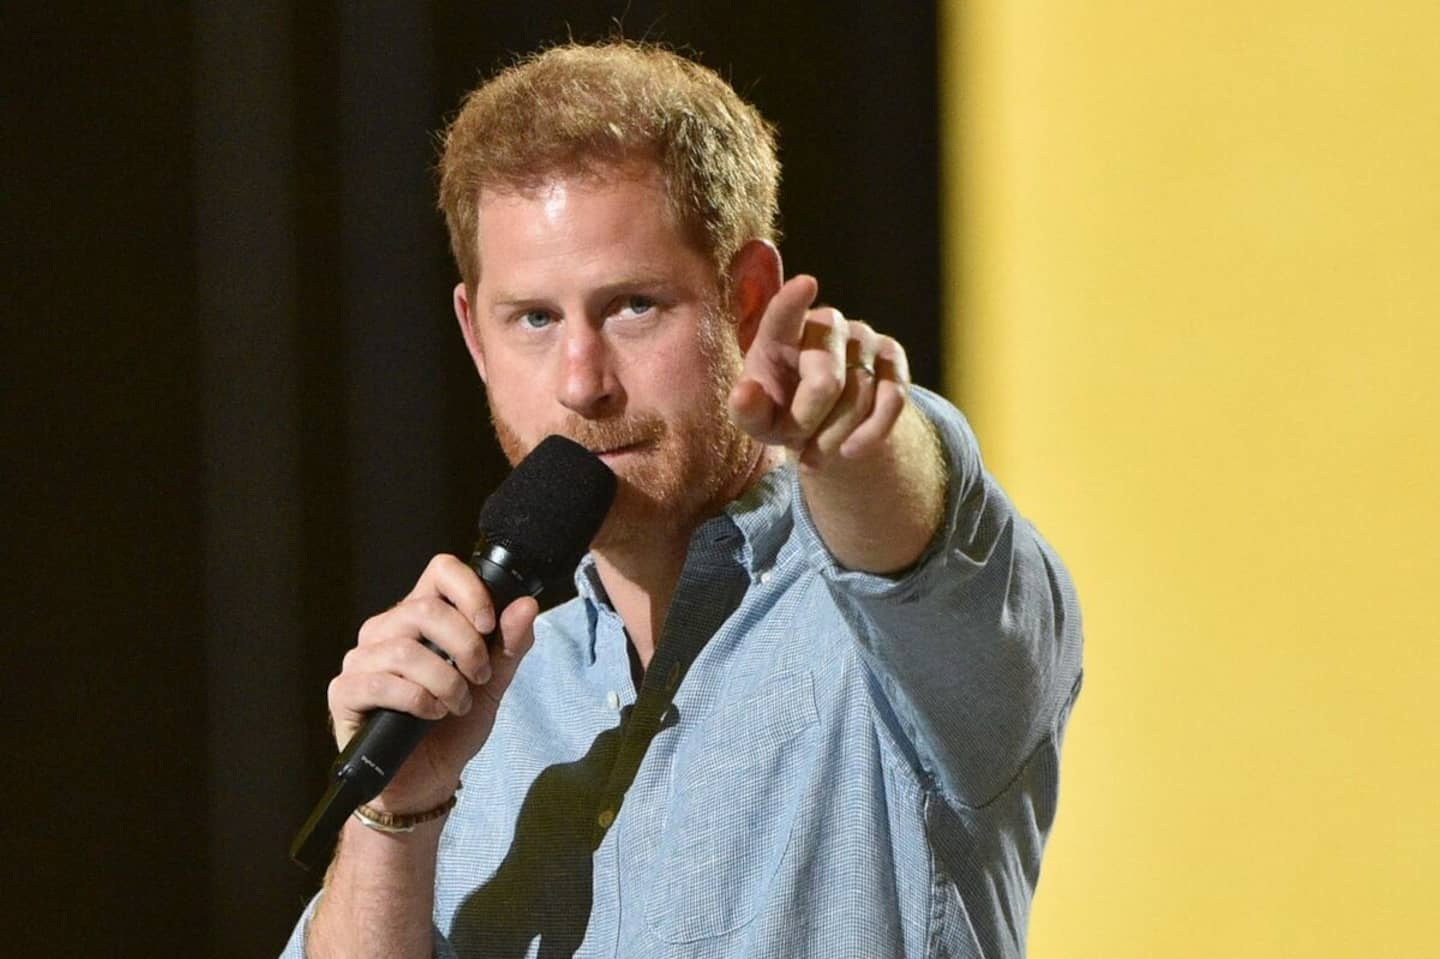 After leaving, Prince Harry sees 'no desire for reconciliation'